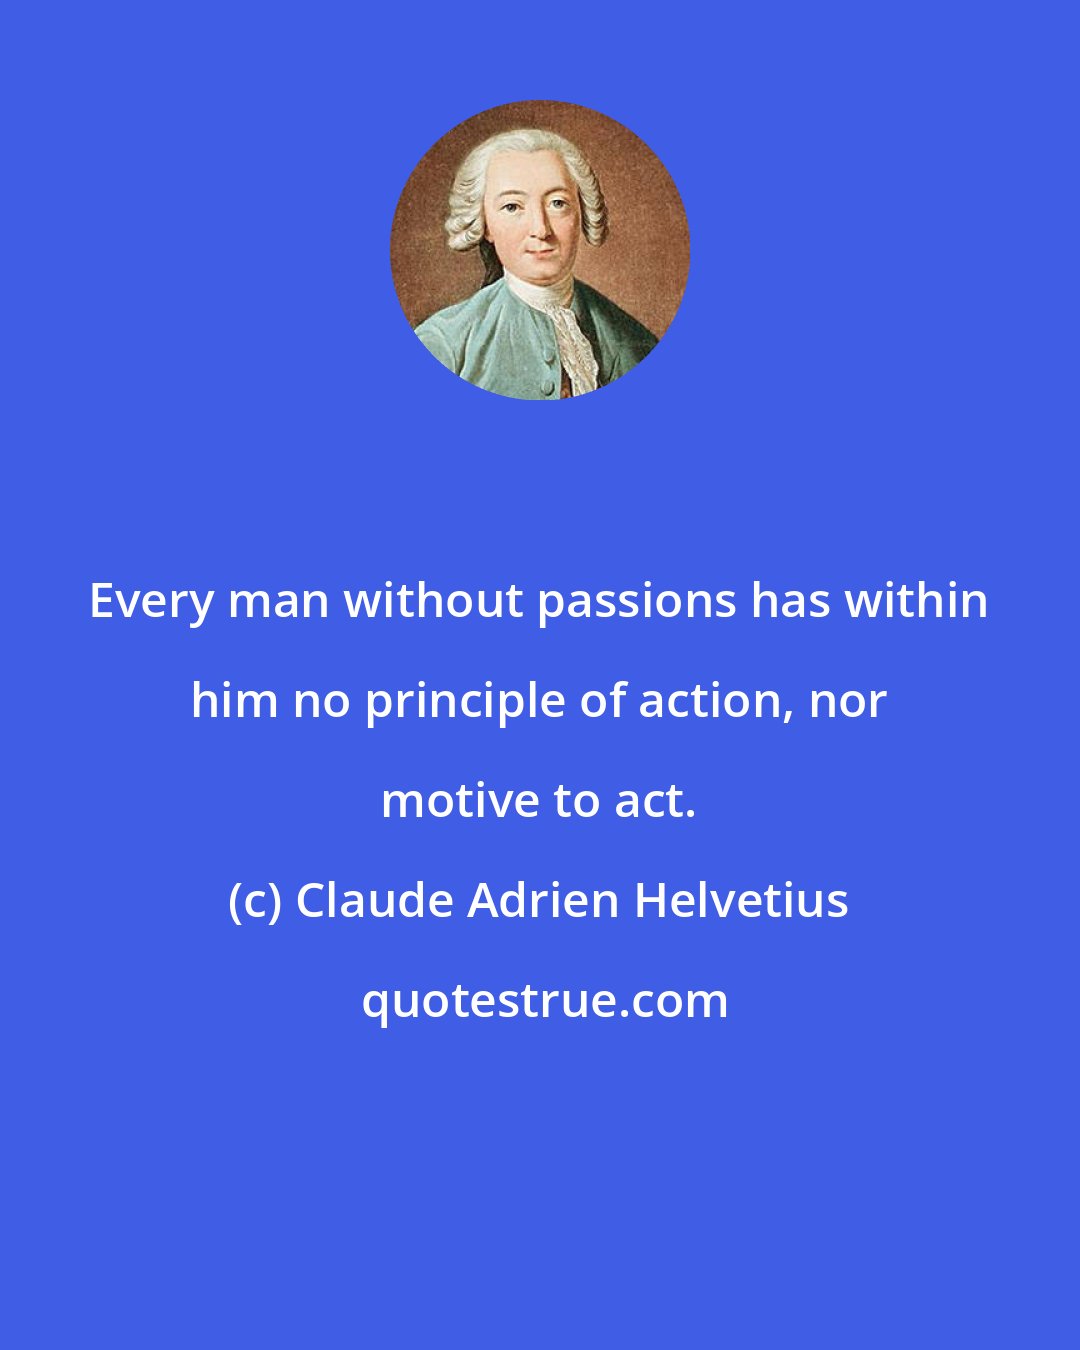 Claude Adrien Helvetius: Every man without passions has within him no principle of action, nor motive to act.